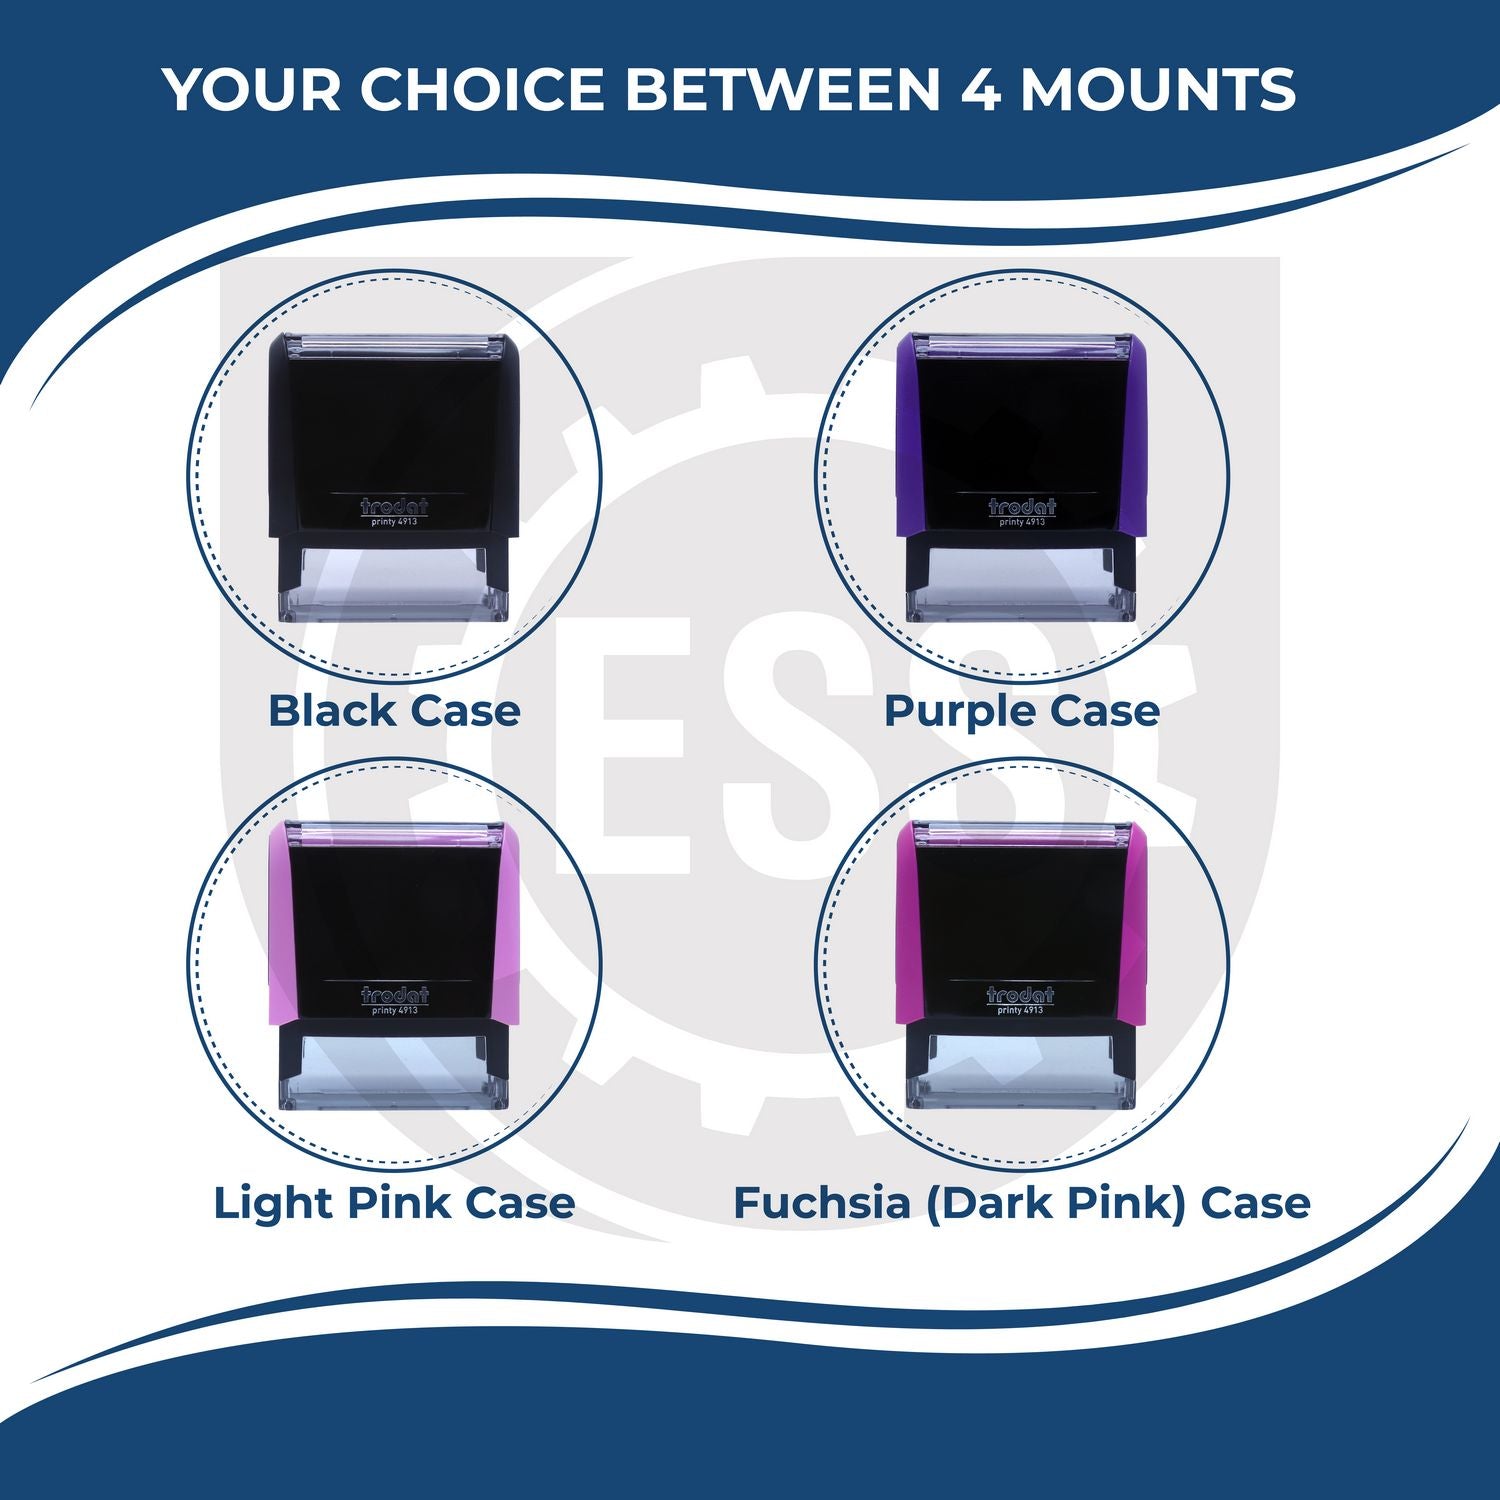 A picture of different colored mounts for the Self-Inking State Seal Delaware Notary Stamp featurning a Red, Blue or Black Mount